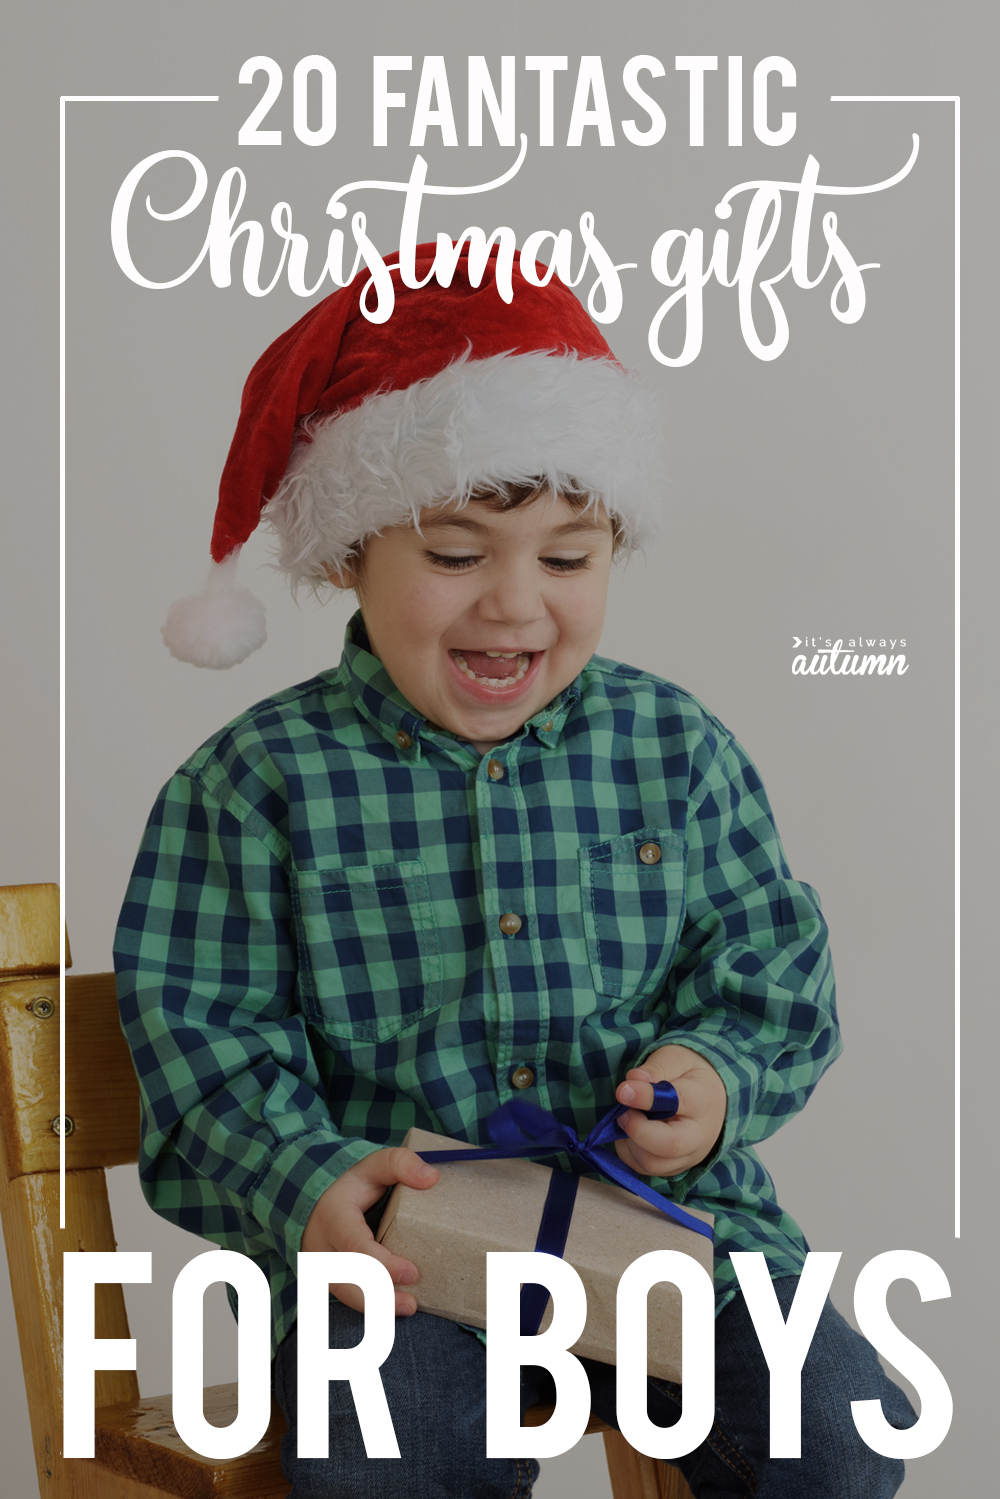 These are the 20 best Christmas gifts for boys! Tons of great ideas here.